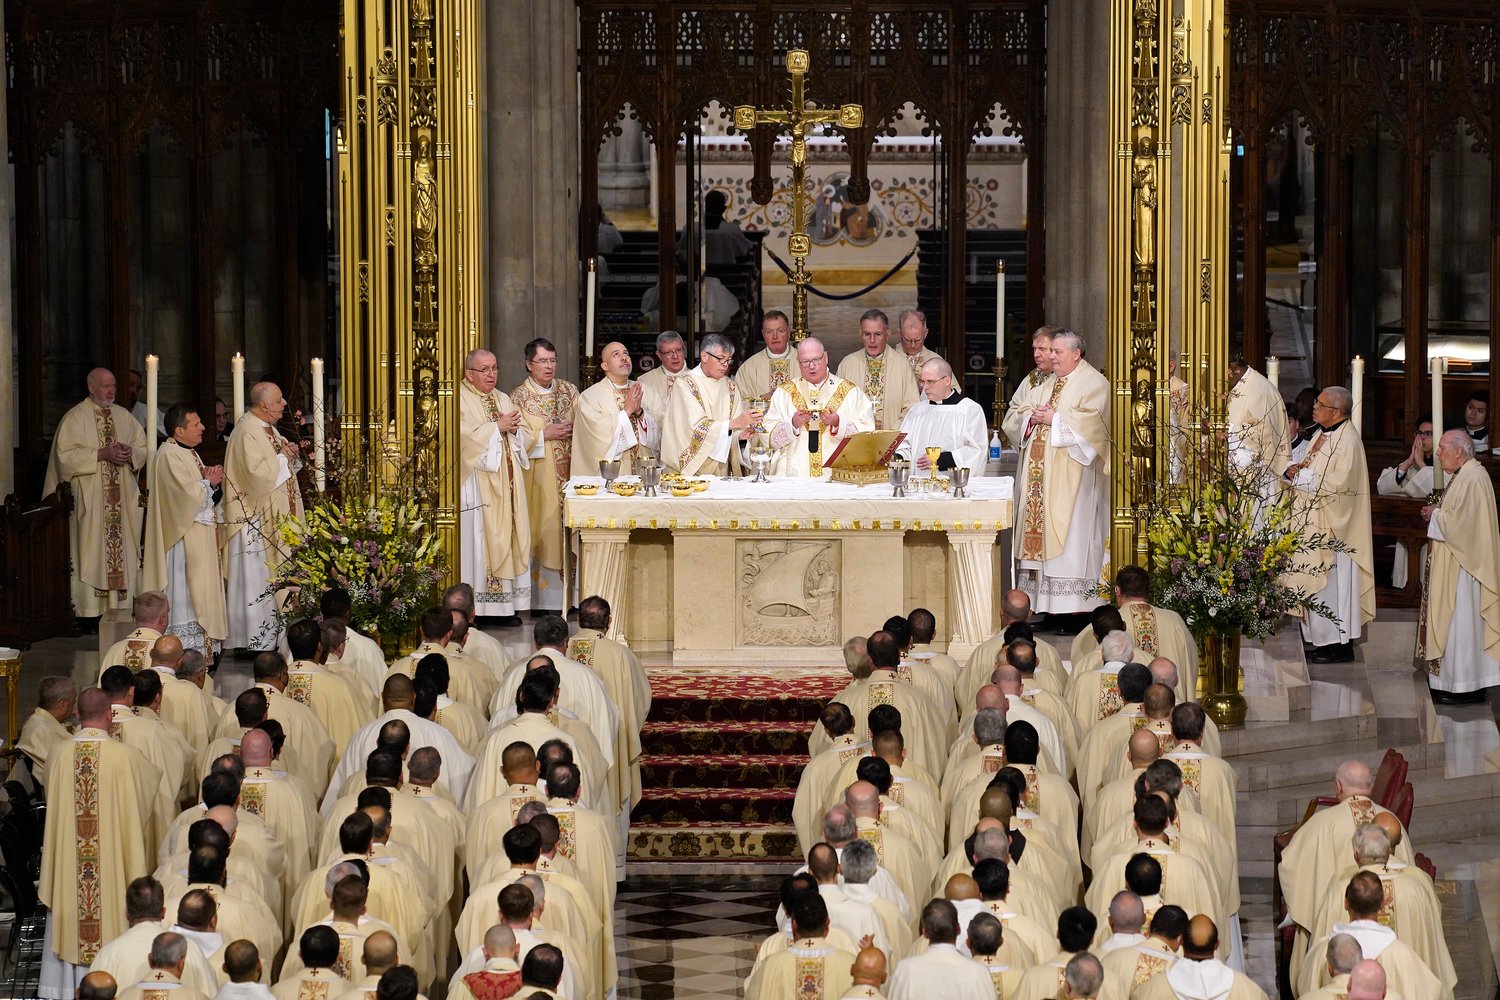 Cardinal Dolan and other clergy gather in the sanctuary during the episcopal ordination of Auxiliary Bishops John S. Bonnici and Joseph A. Espaillat March 1 at St. Patrick's Cathedral.